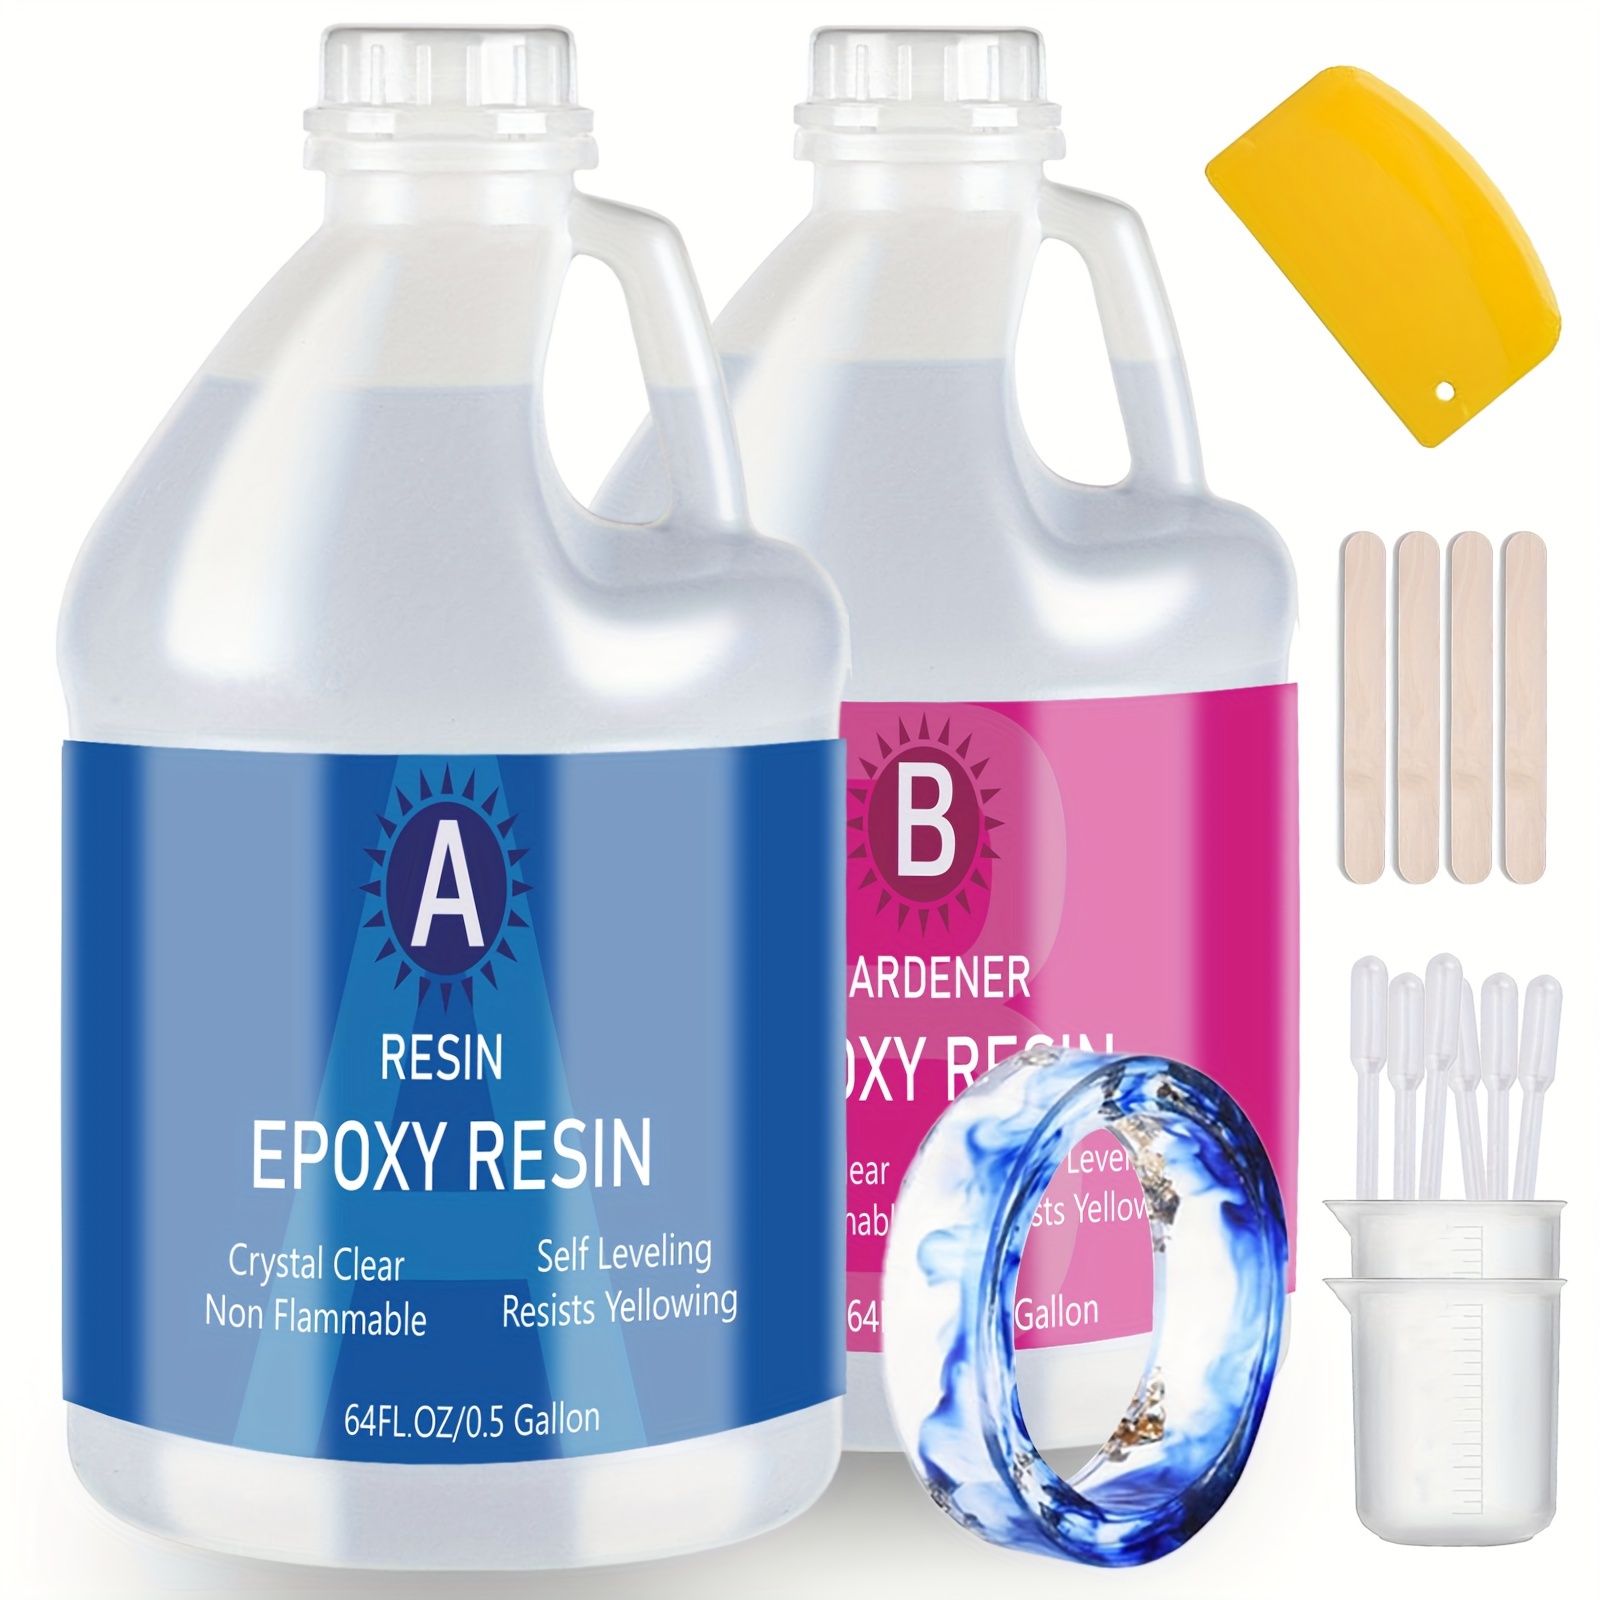 

1 Gallon Epoxy Resin Kit, Upgraded Crystal Clear Hard Casting Resin And Hardener Epoxy Clear 2 Part Resin Art Supplies For Jewelry Making Molds Tabletop Crafts 1:1